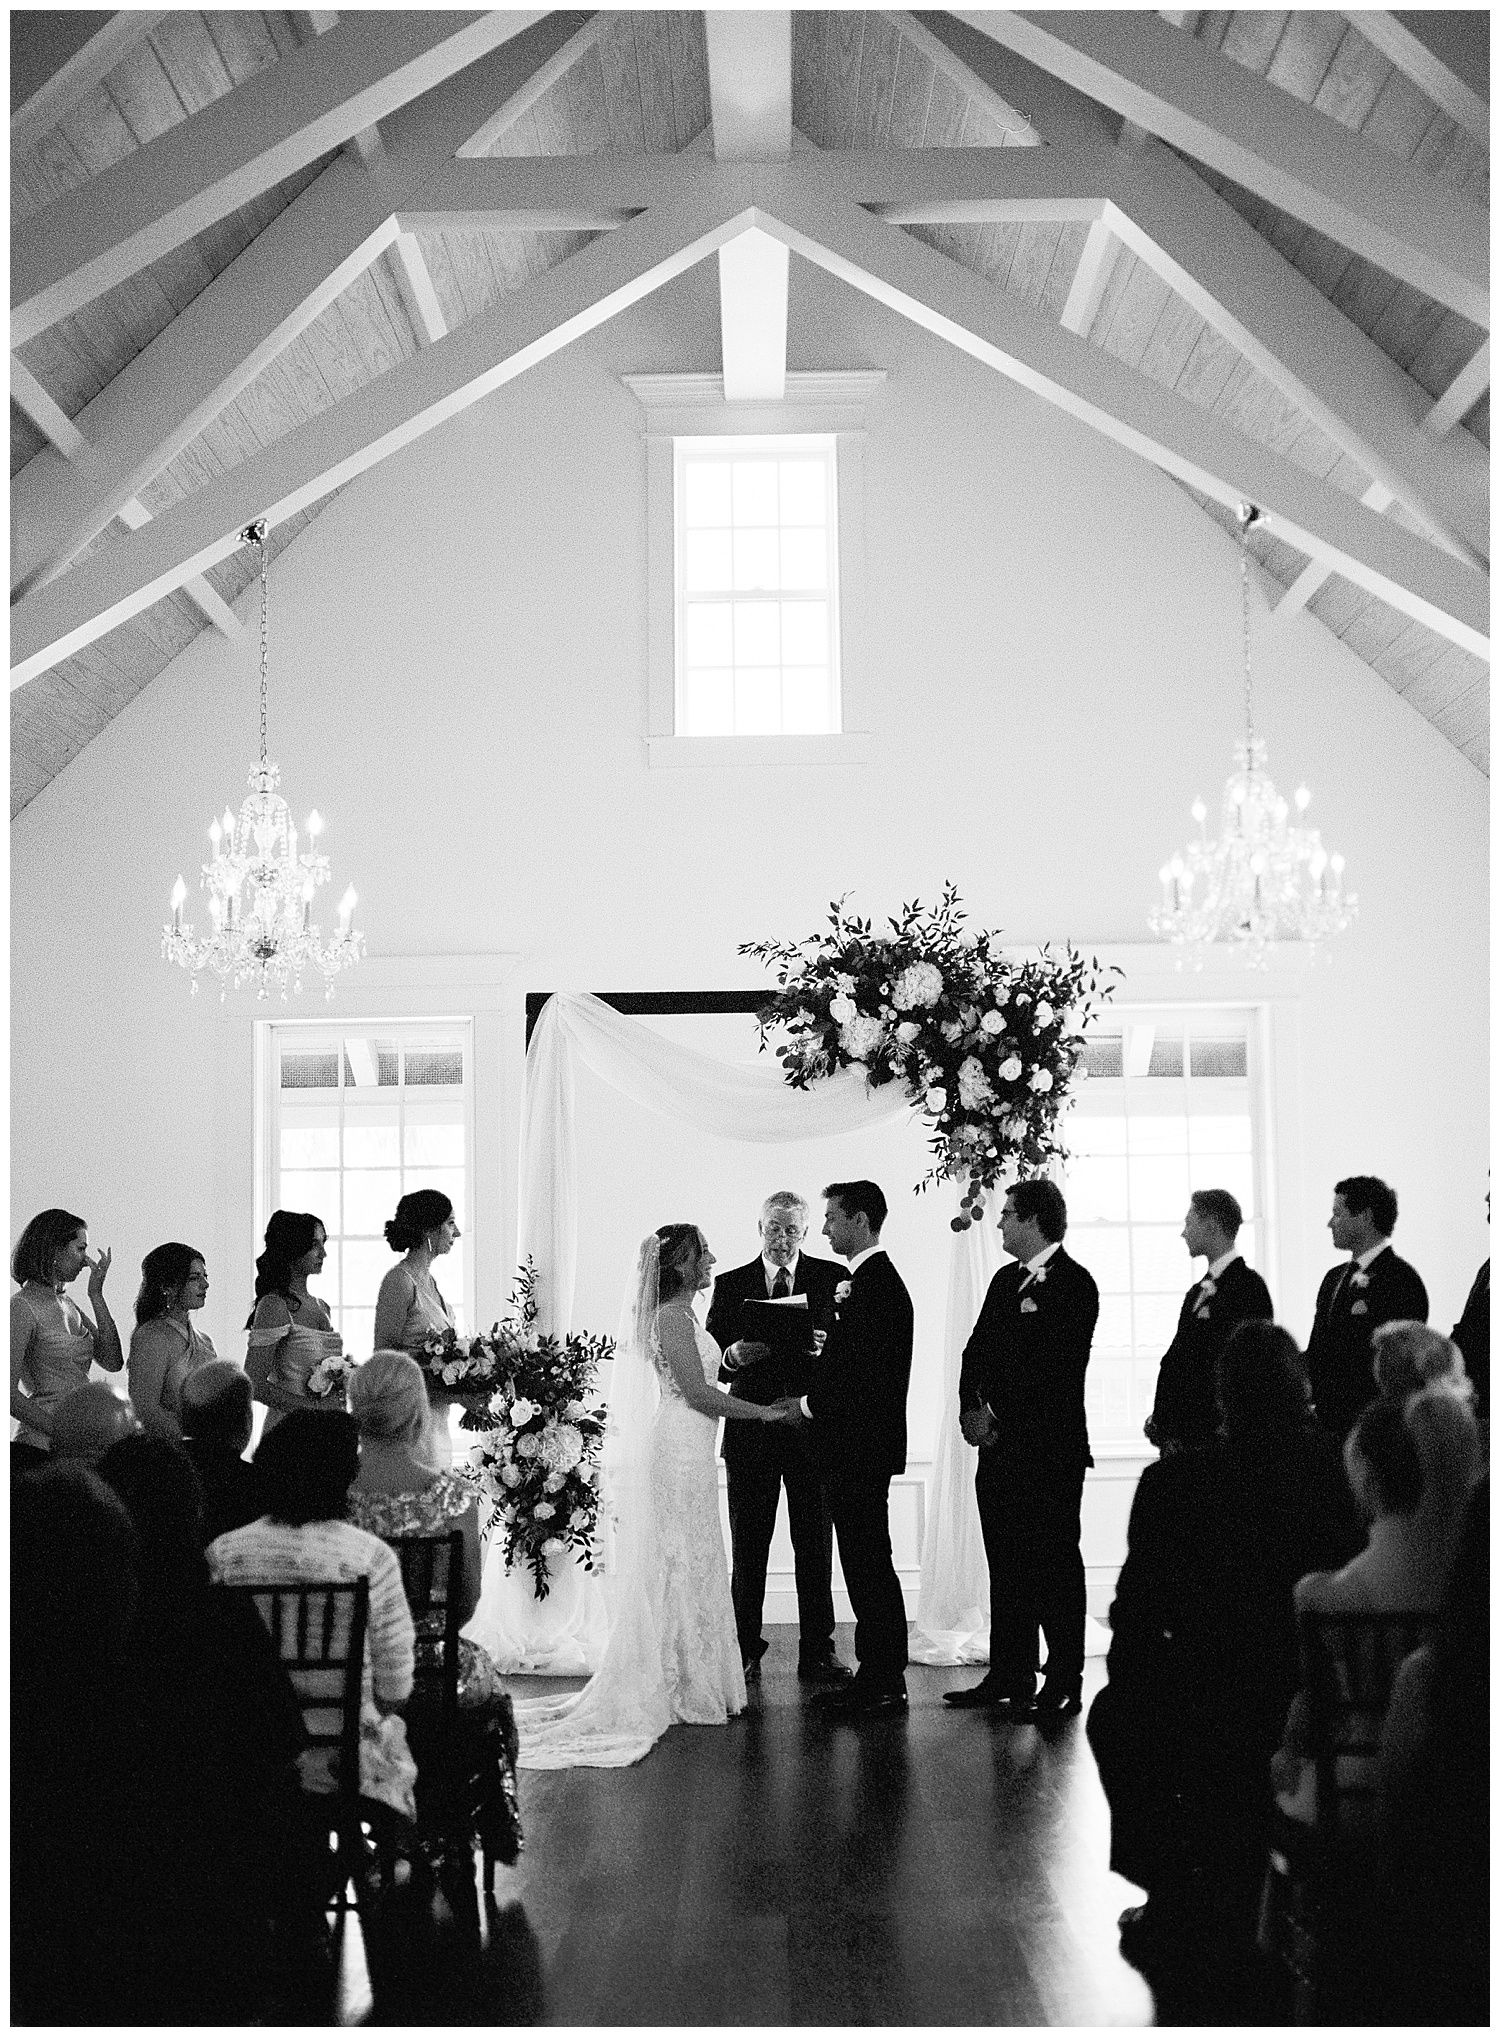 Wedding ceremony at The White Room in St. Augustine, Florida